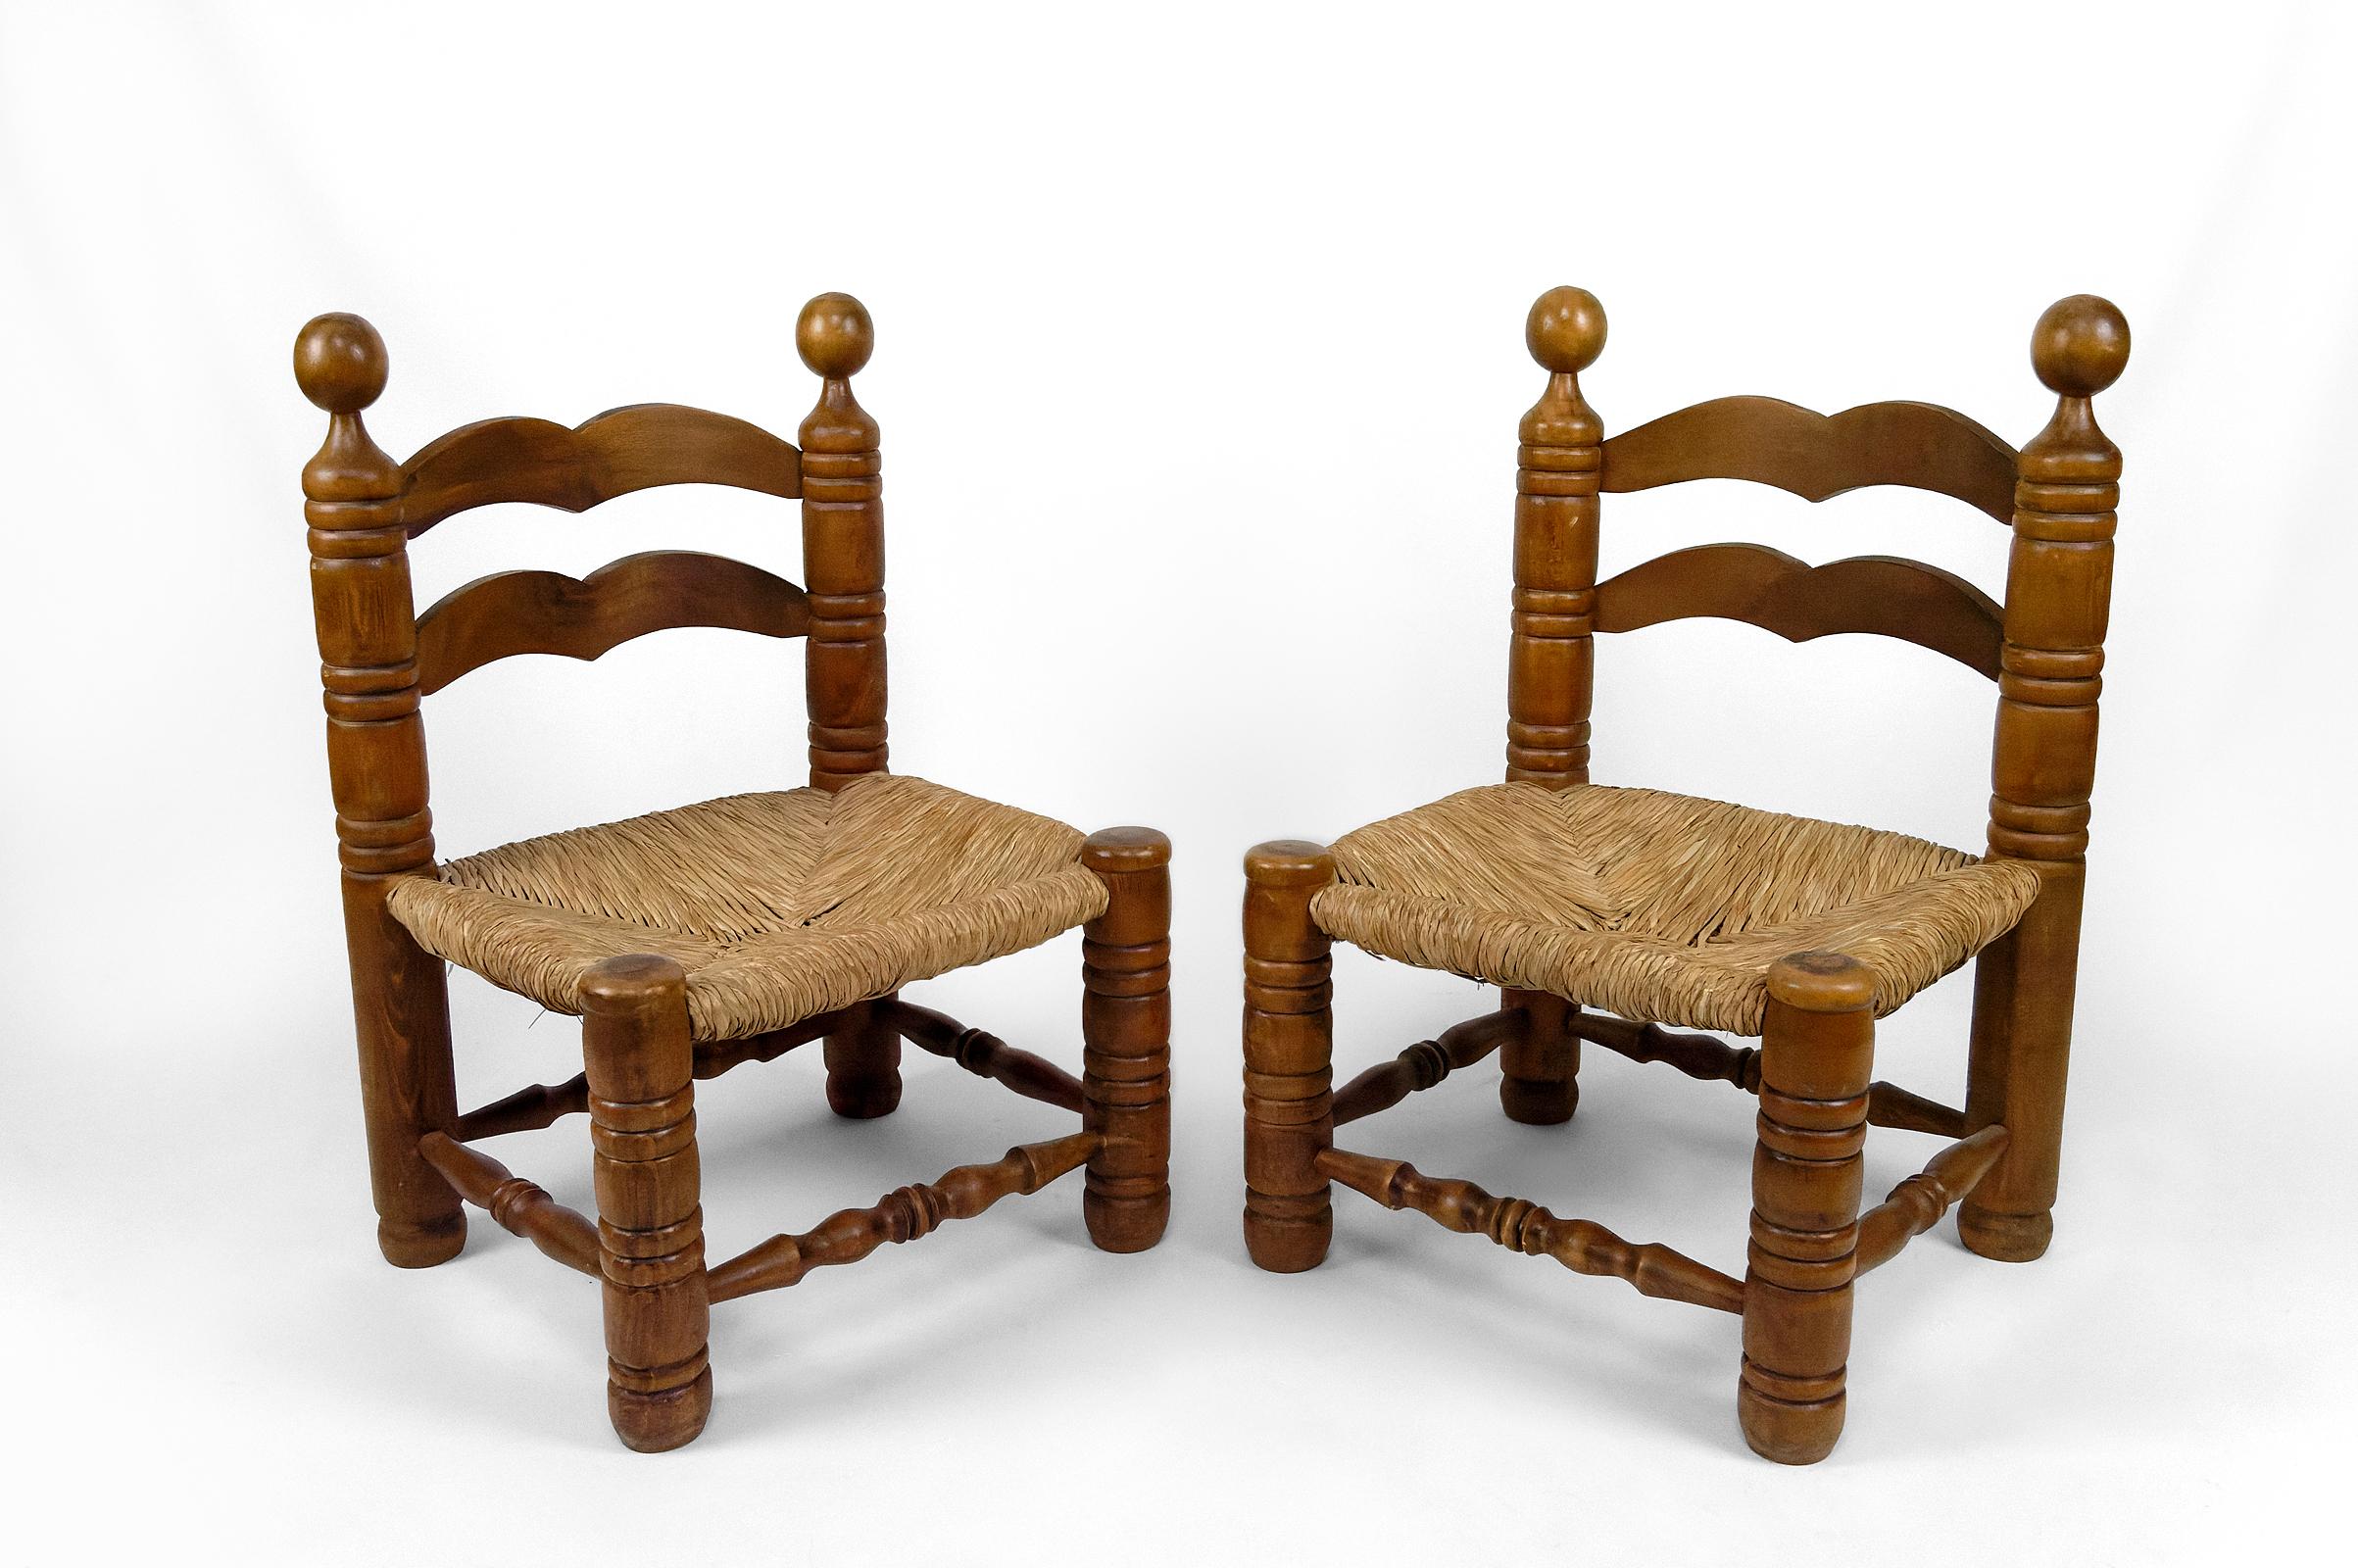 Pair of low chairs by Charles Dudouyt.

Dudouyt began his career as a cabinetmaker and worked for important cabinetmakers, such as Dominique, and for private clients. He quickly developed a distinctive style that combined traditional elements with